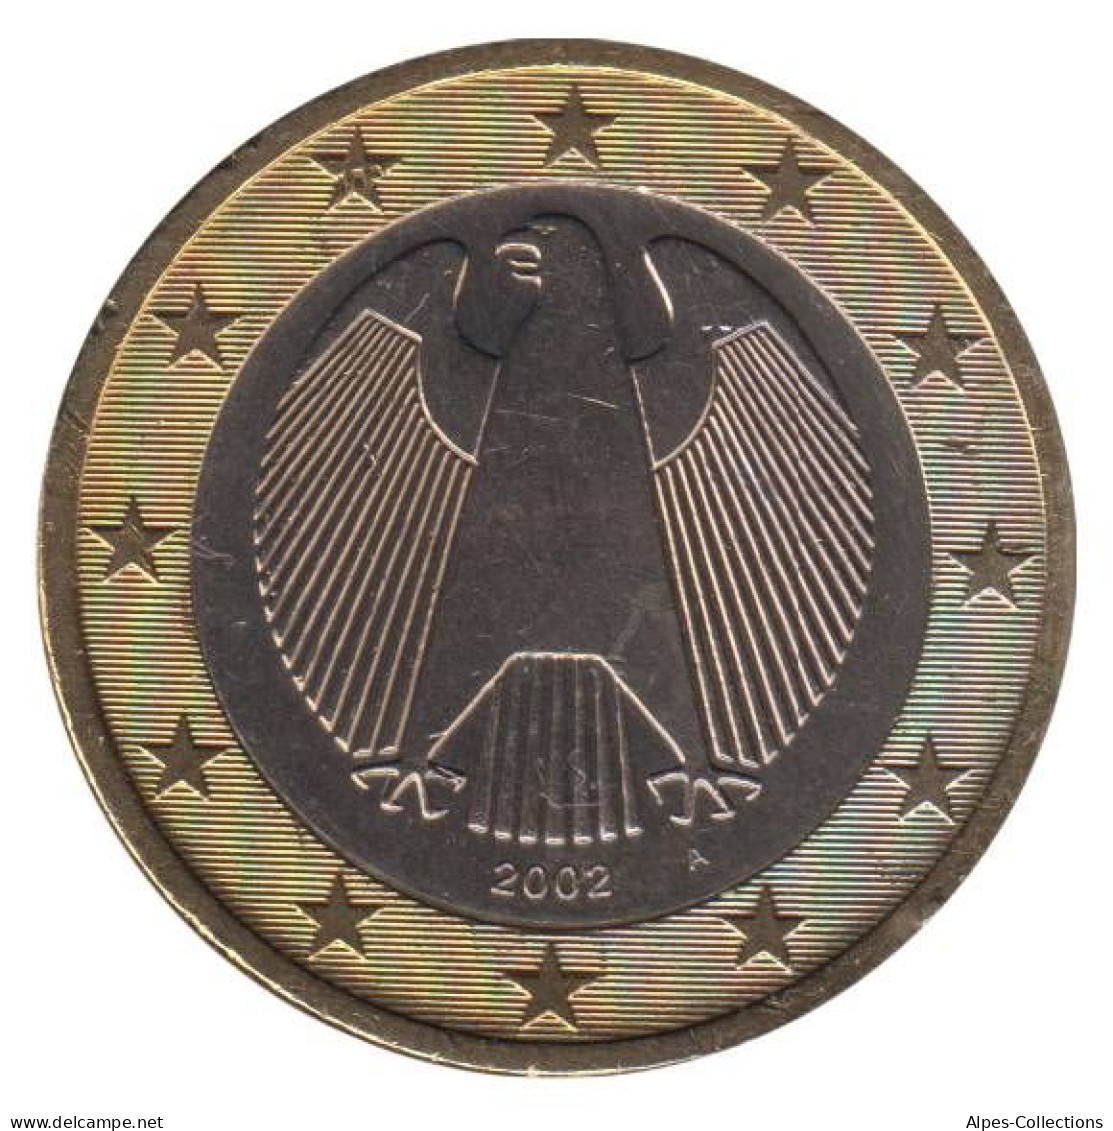 AL10002.1A - ALLEMAGNE - 1 Euro - 2002 A - Germany